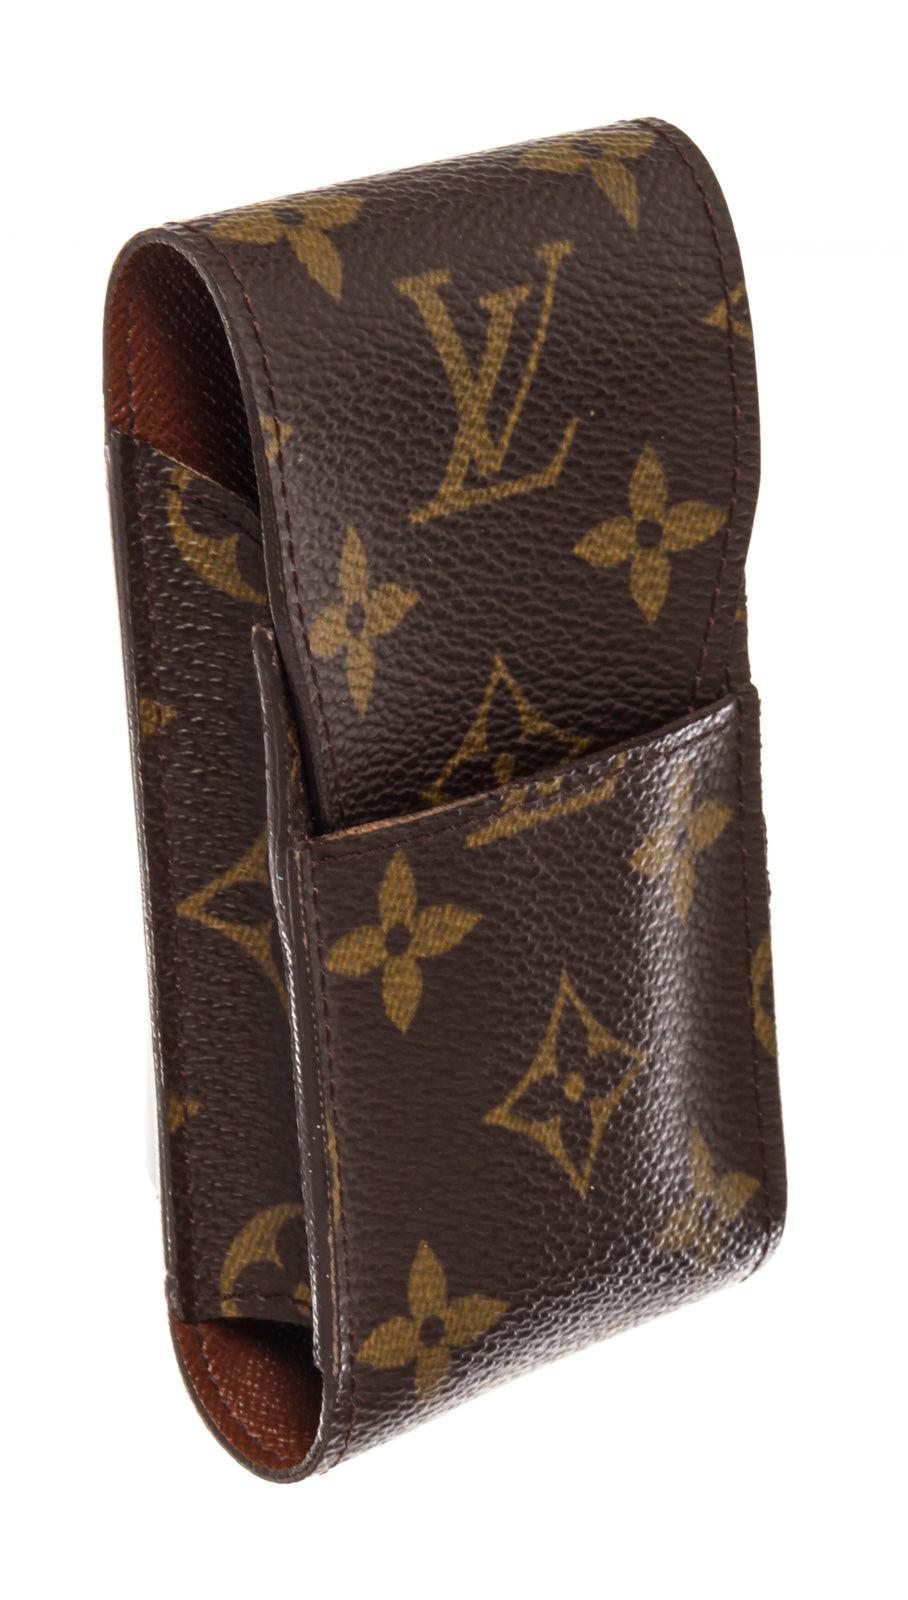 Brown and tan monogram coated canvas Louis Vuitton cigarette holder with leather lining and tab insert flap closure at front.
 


50888MSC

2.6